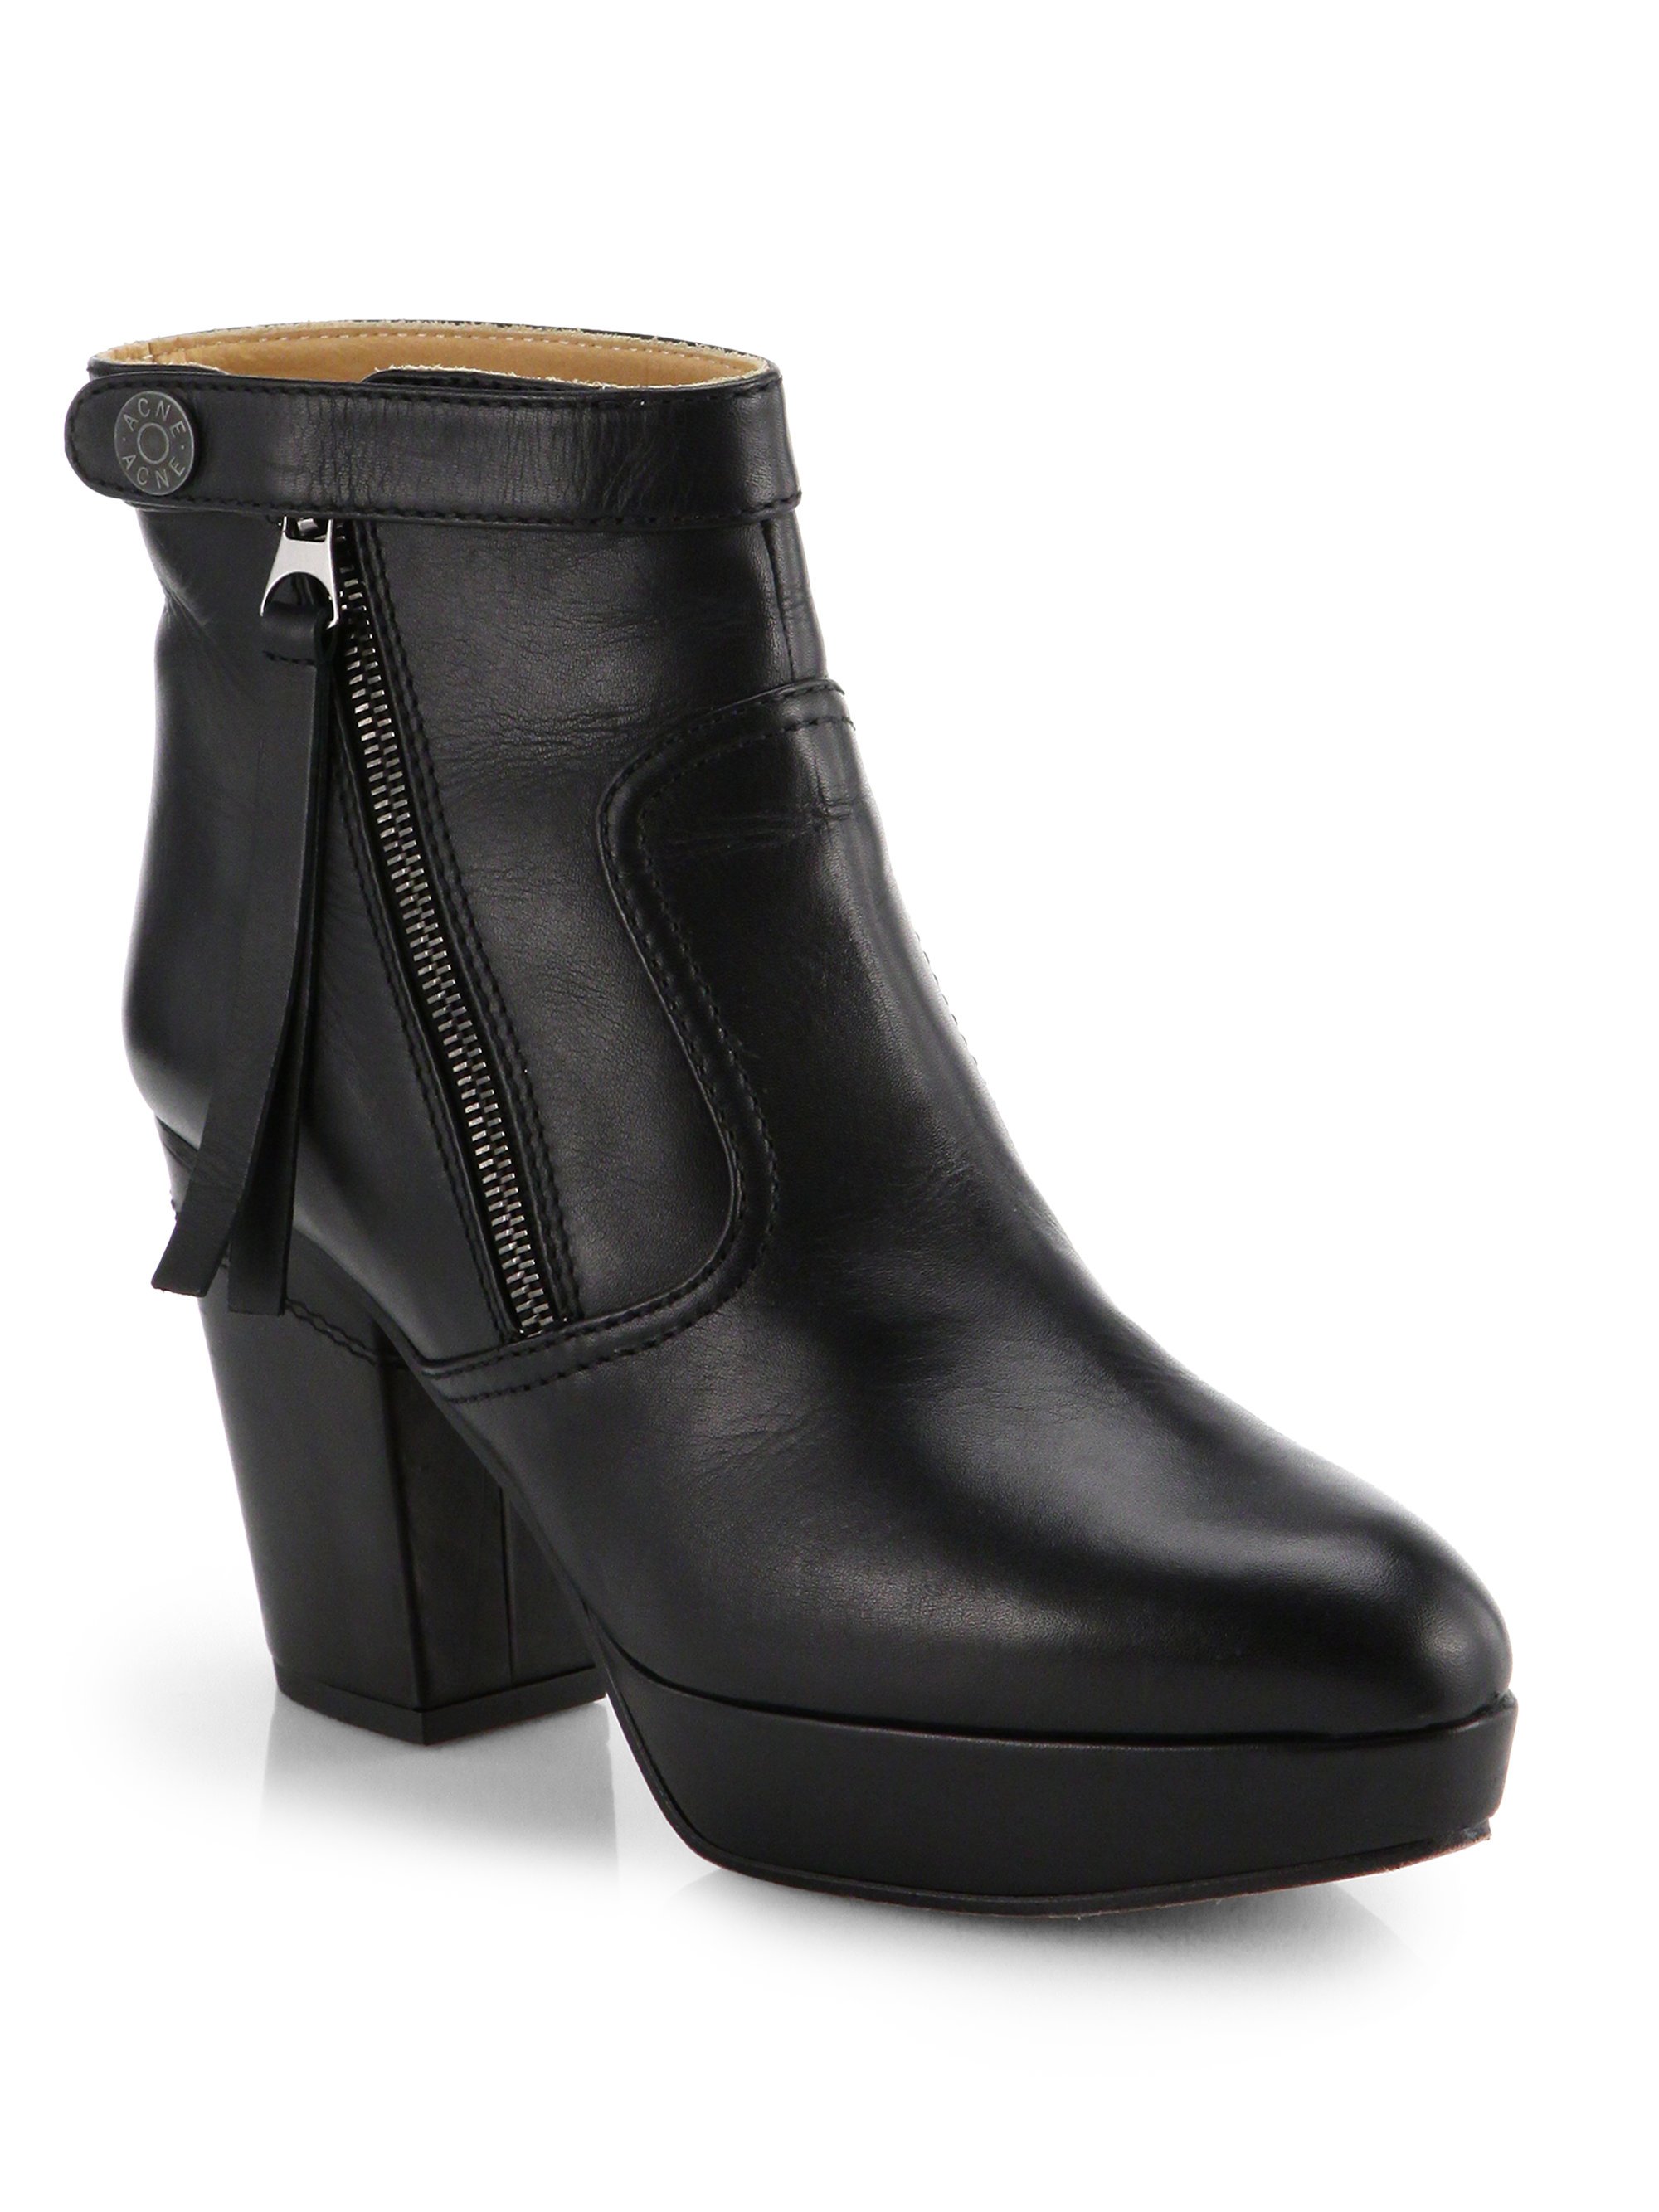 Acne studios Track Leather Platform Ankle Boots in Black | Lyst